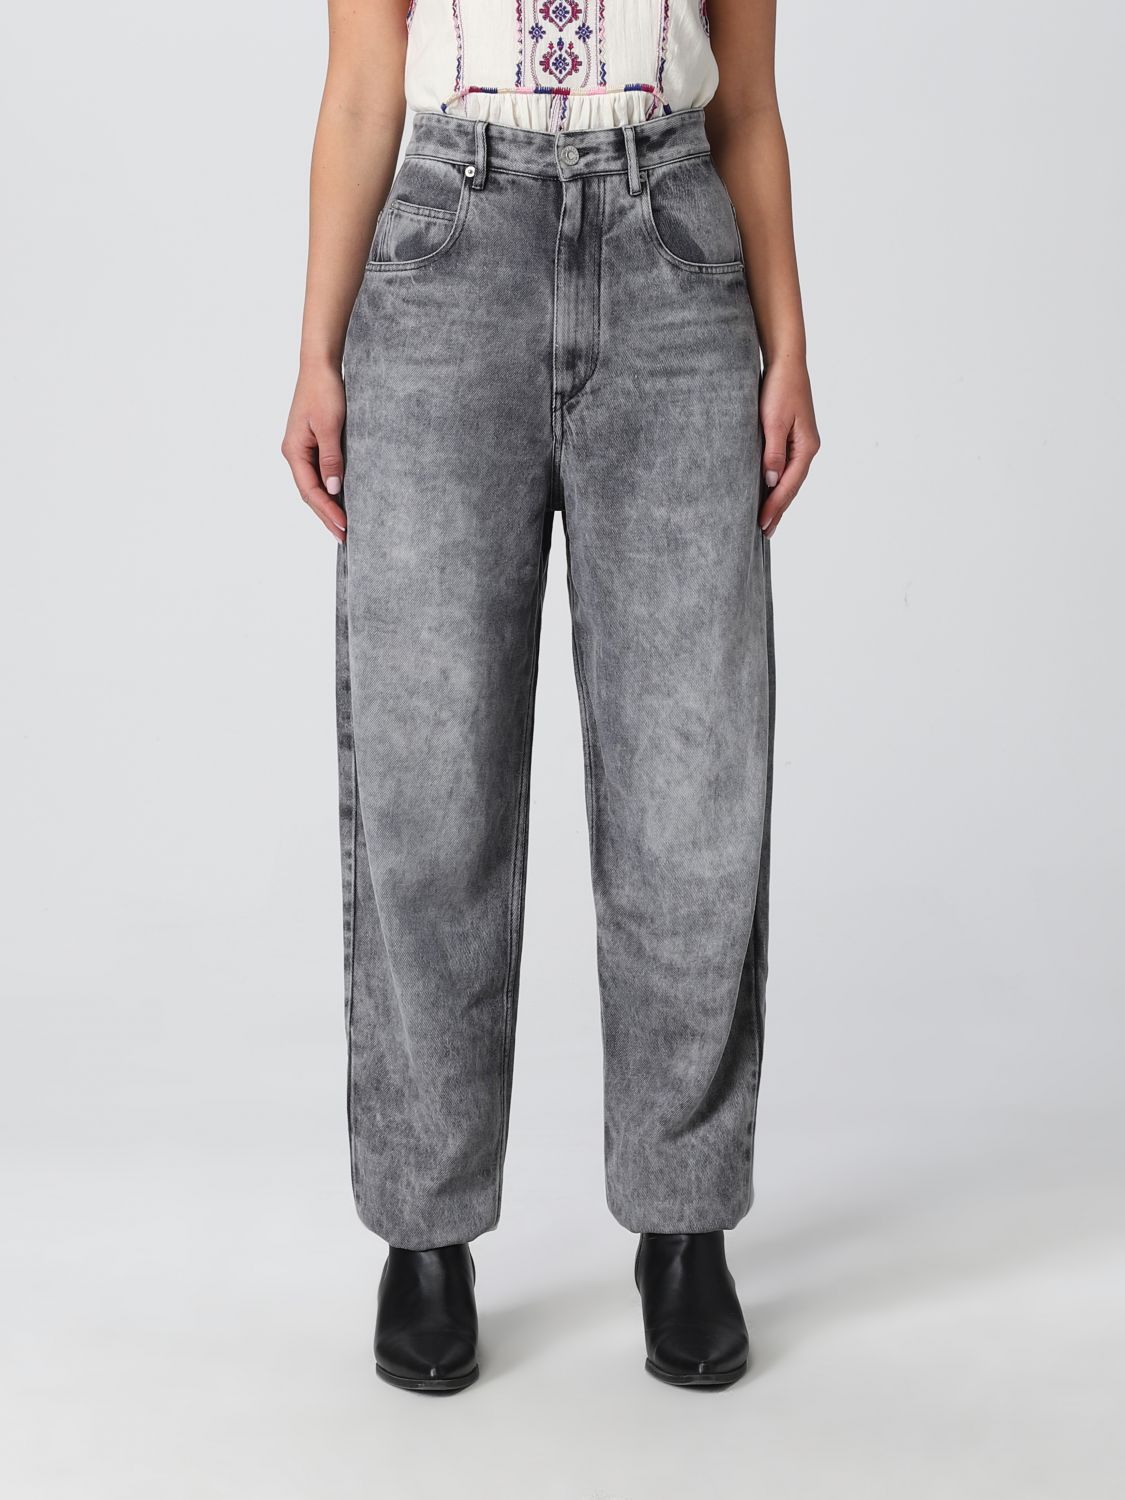 Isabel Marant Étoile Jeans In Washed Denim In Grey | ModeSens